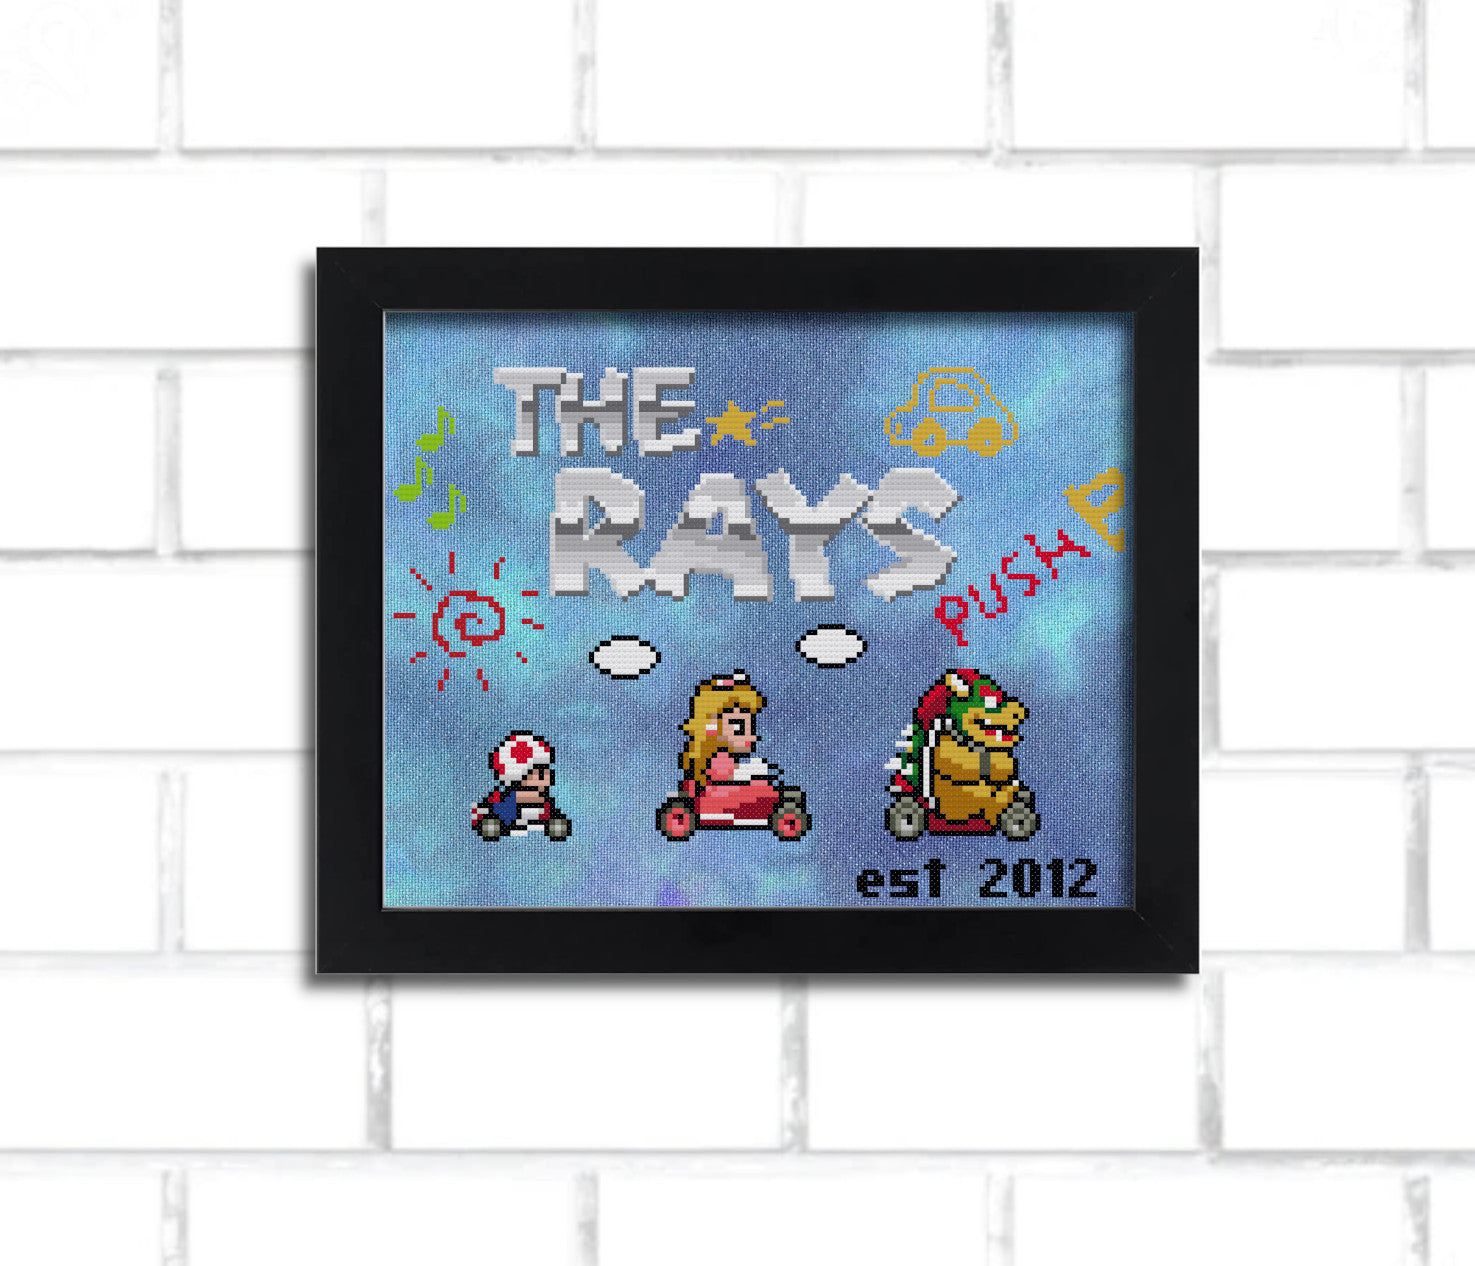 A digital render of a cross stitch, it says "the rays" in a metallic looking 8 bit mario-inspired font and features Super Mario Kart inspired sprites of Bowser, Peach, and small Toad. it's in a black frame hung on a white brick wall.